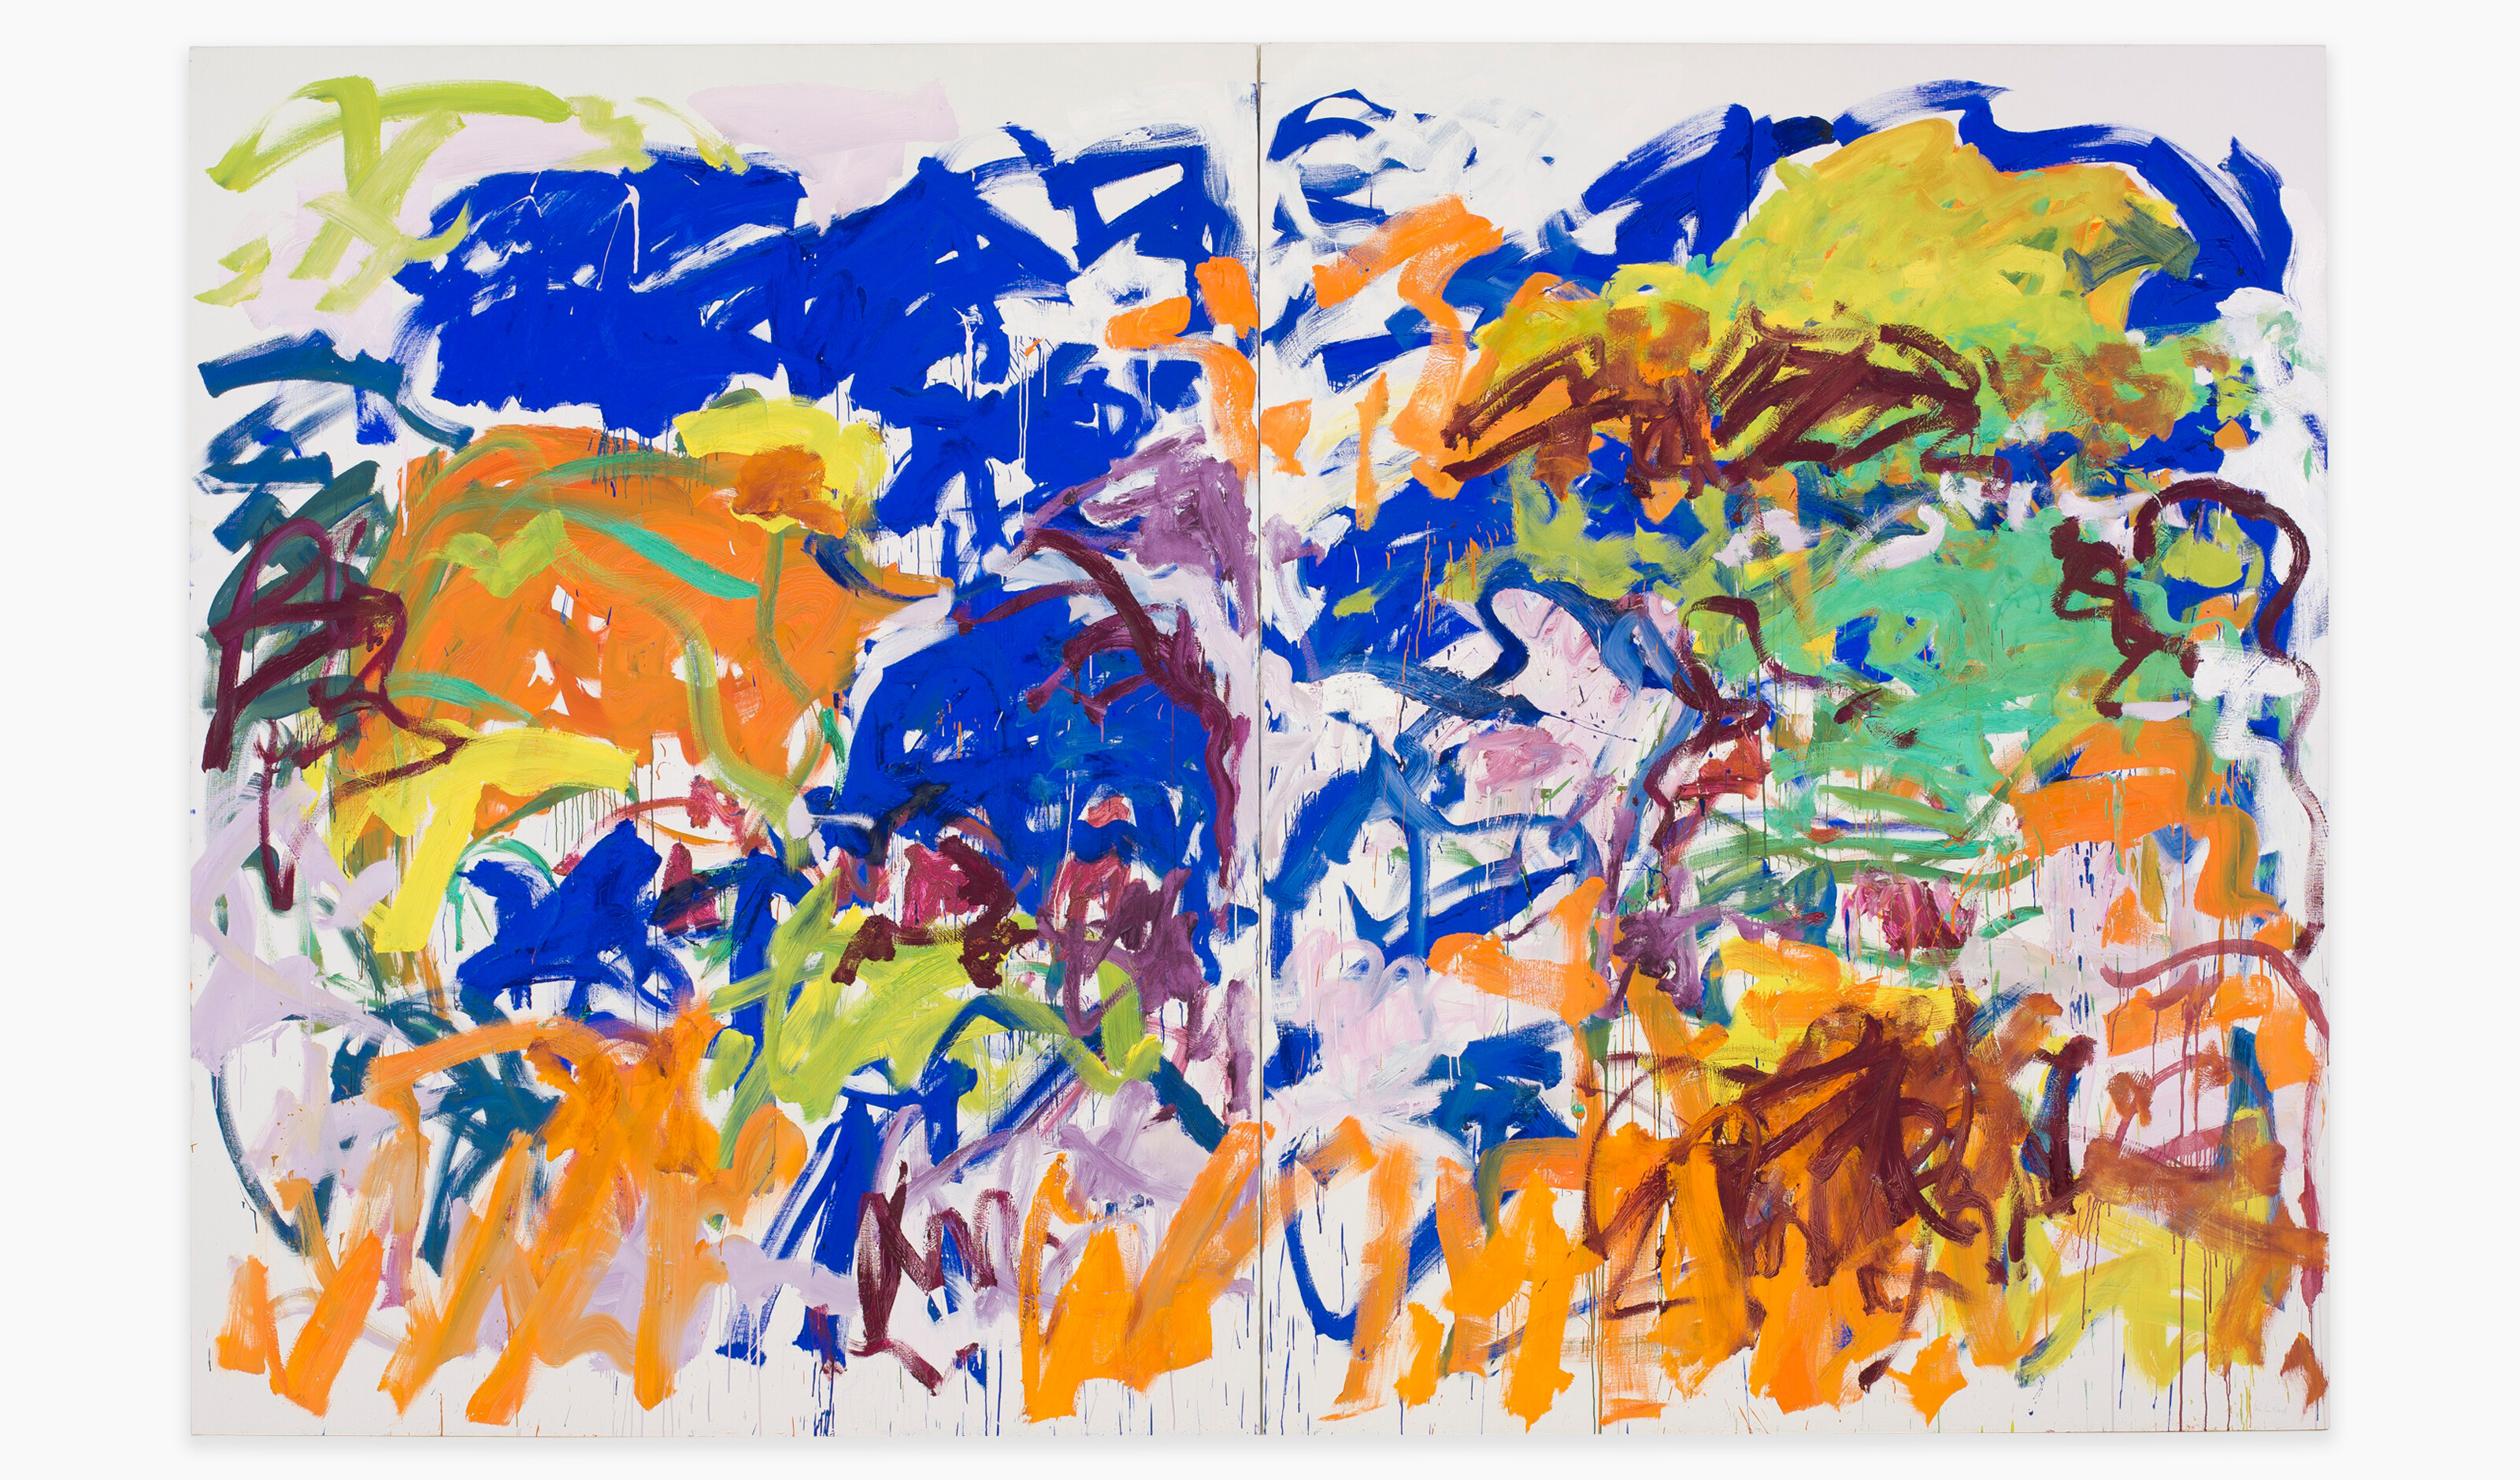 A painting by Joan Mitchell, titled, Ici, dated 1992.